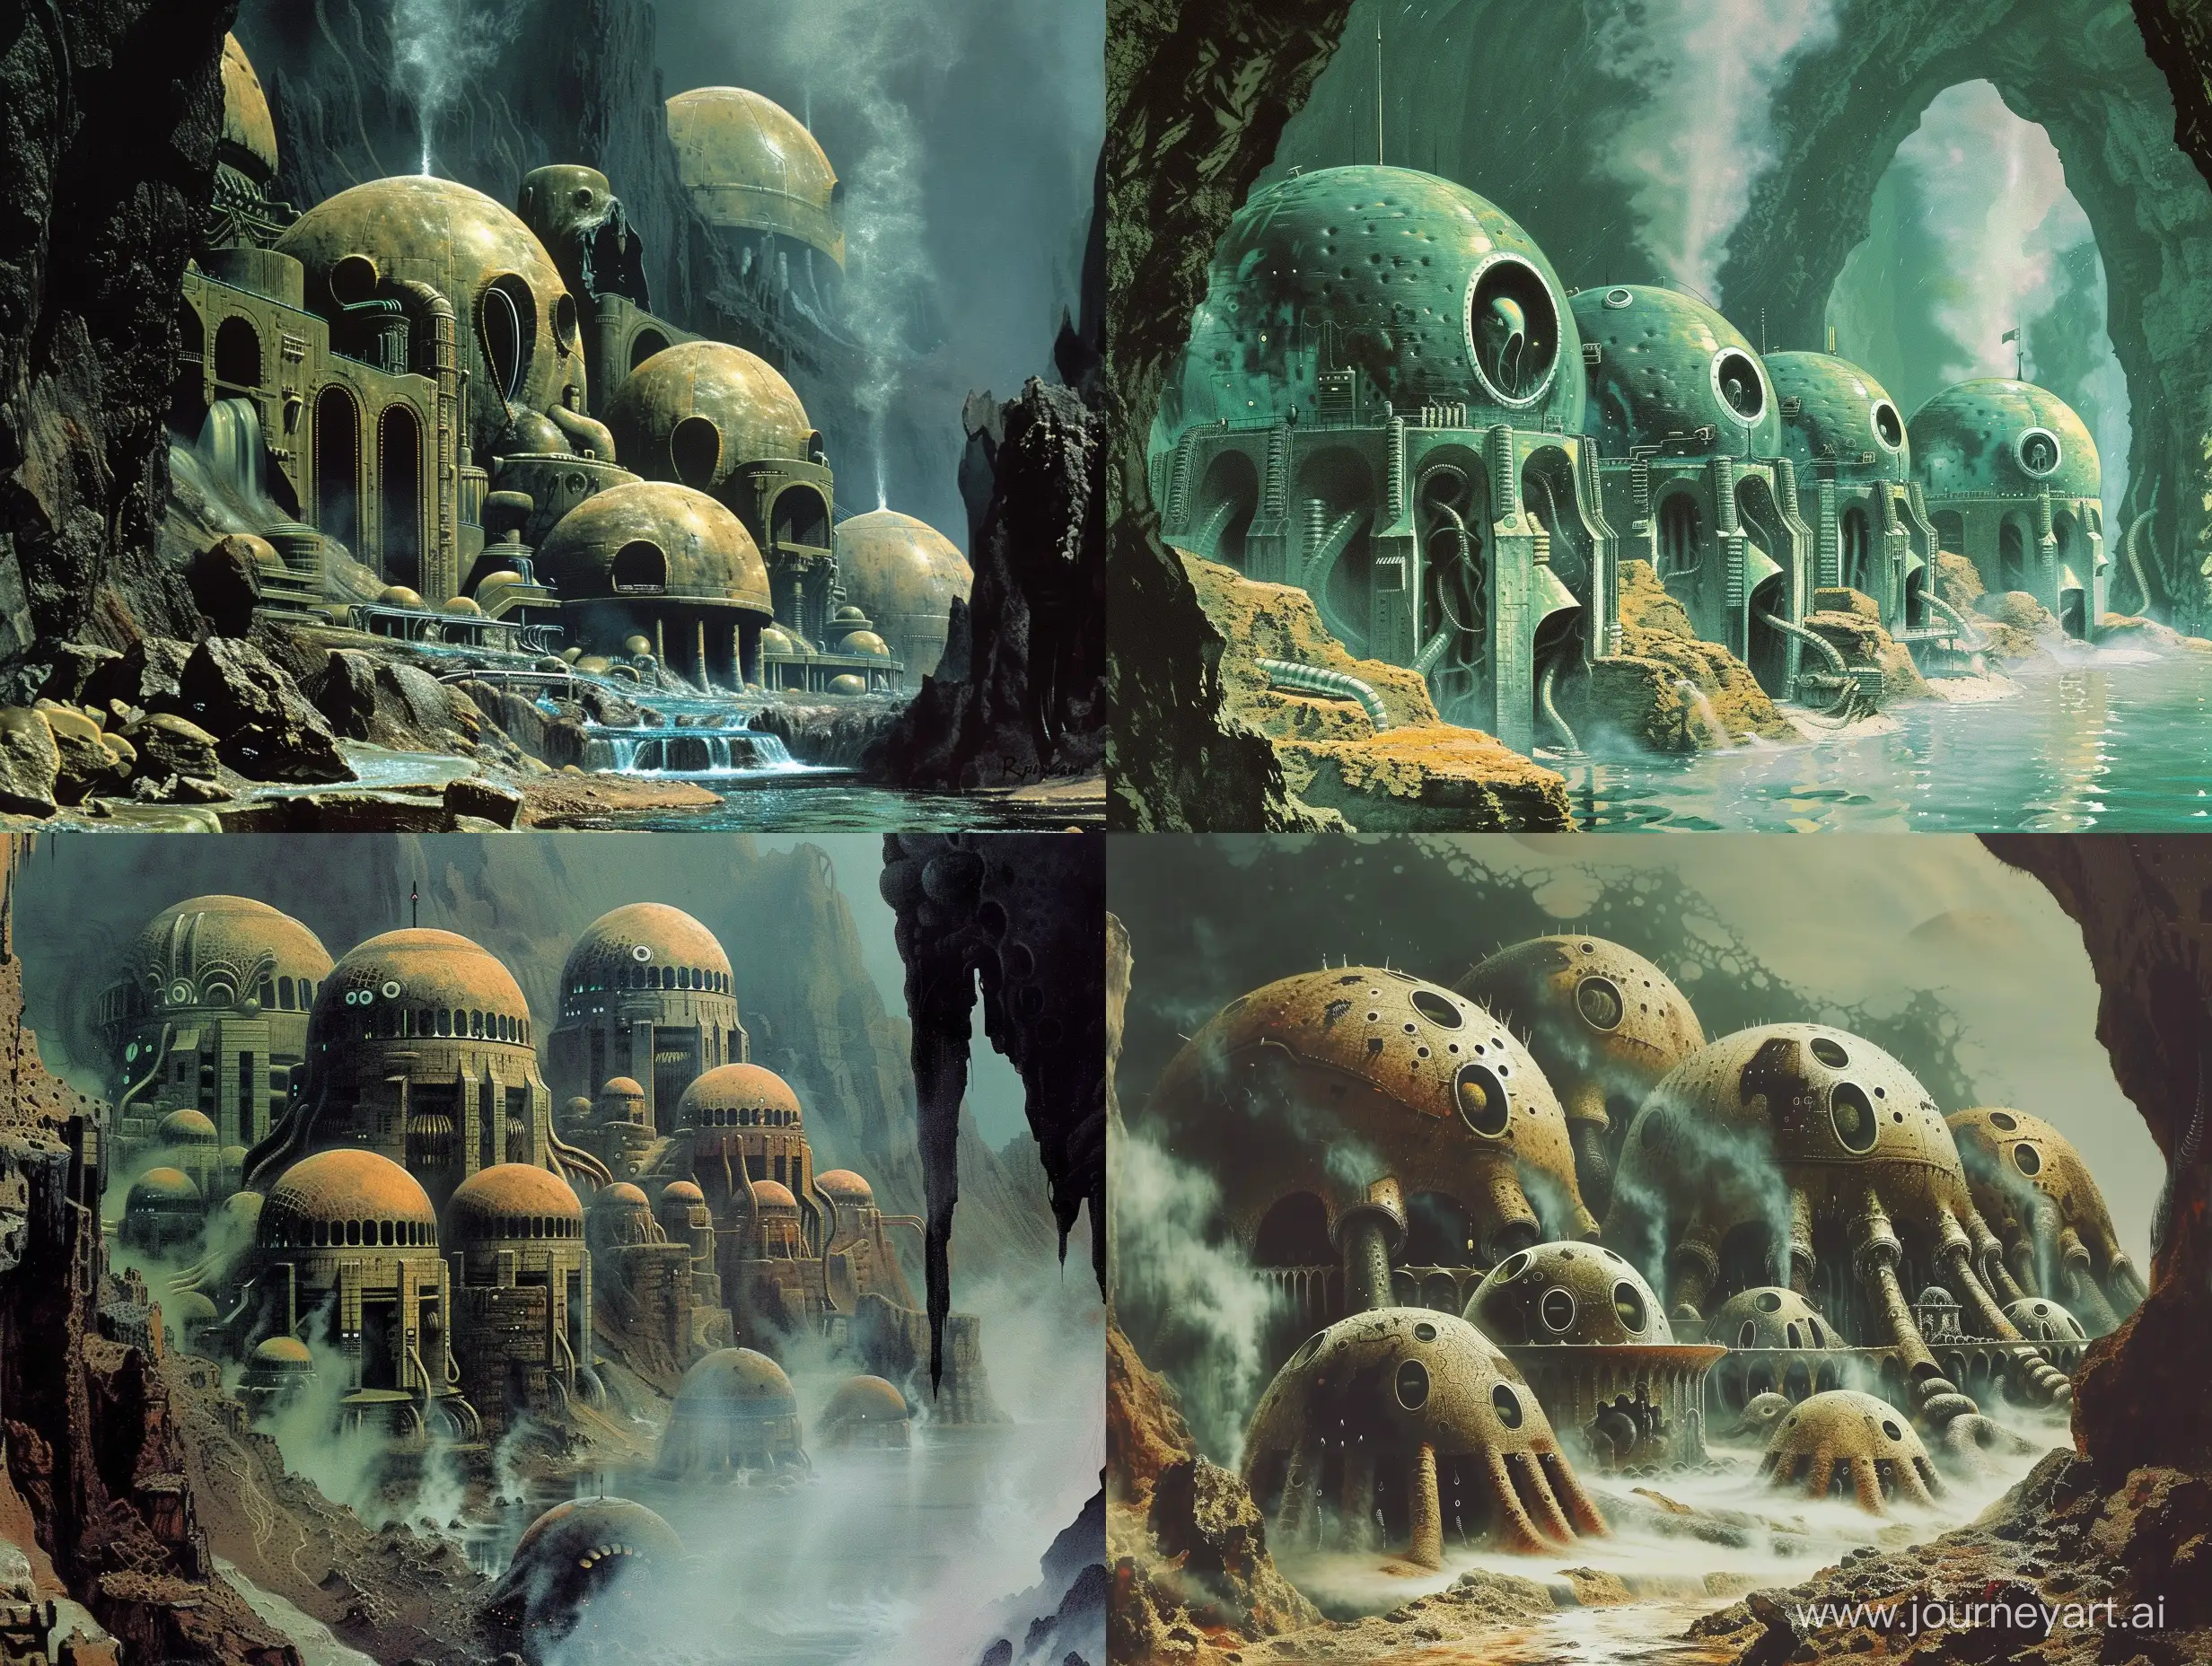 Concept art of an undersea city of domes inhabited by aquatic aliens by HR Giger. Amidst some smoking hydrothermal vents. Retro science fiction style. Surreal. In color. 